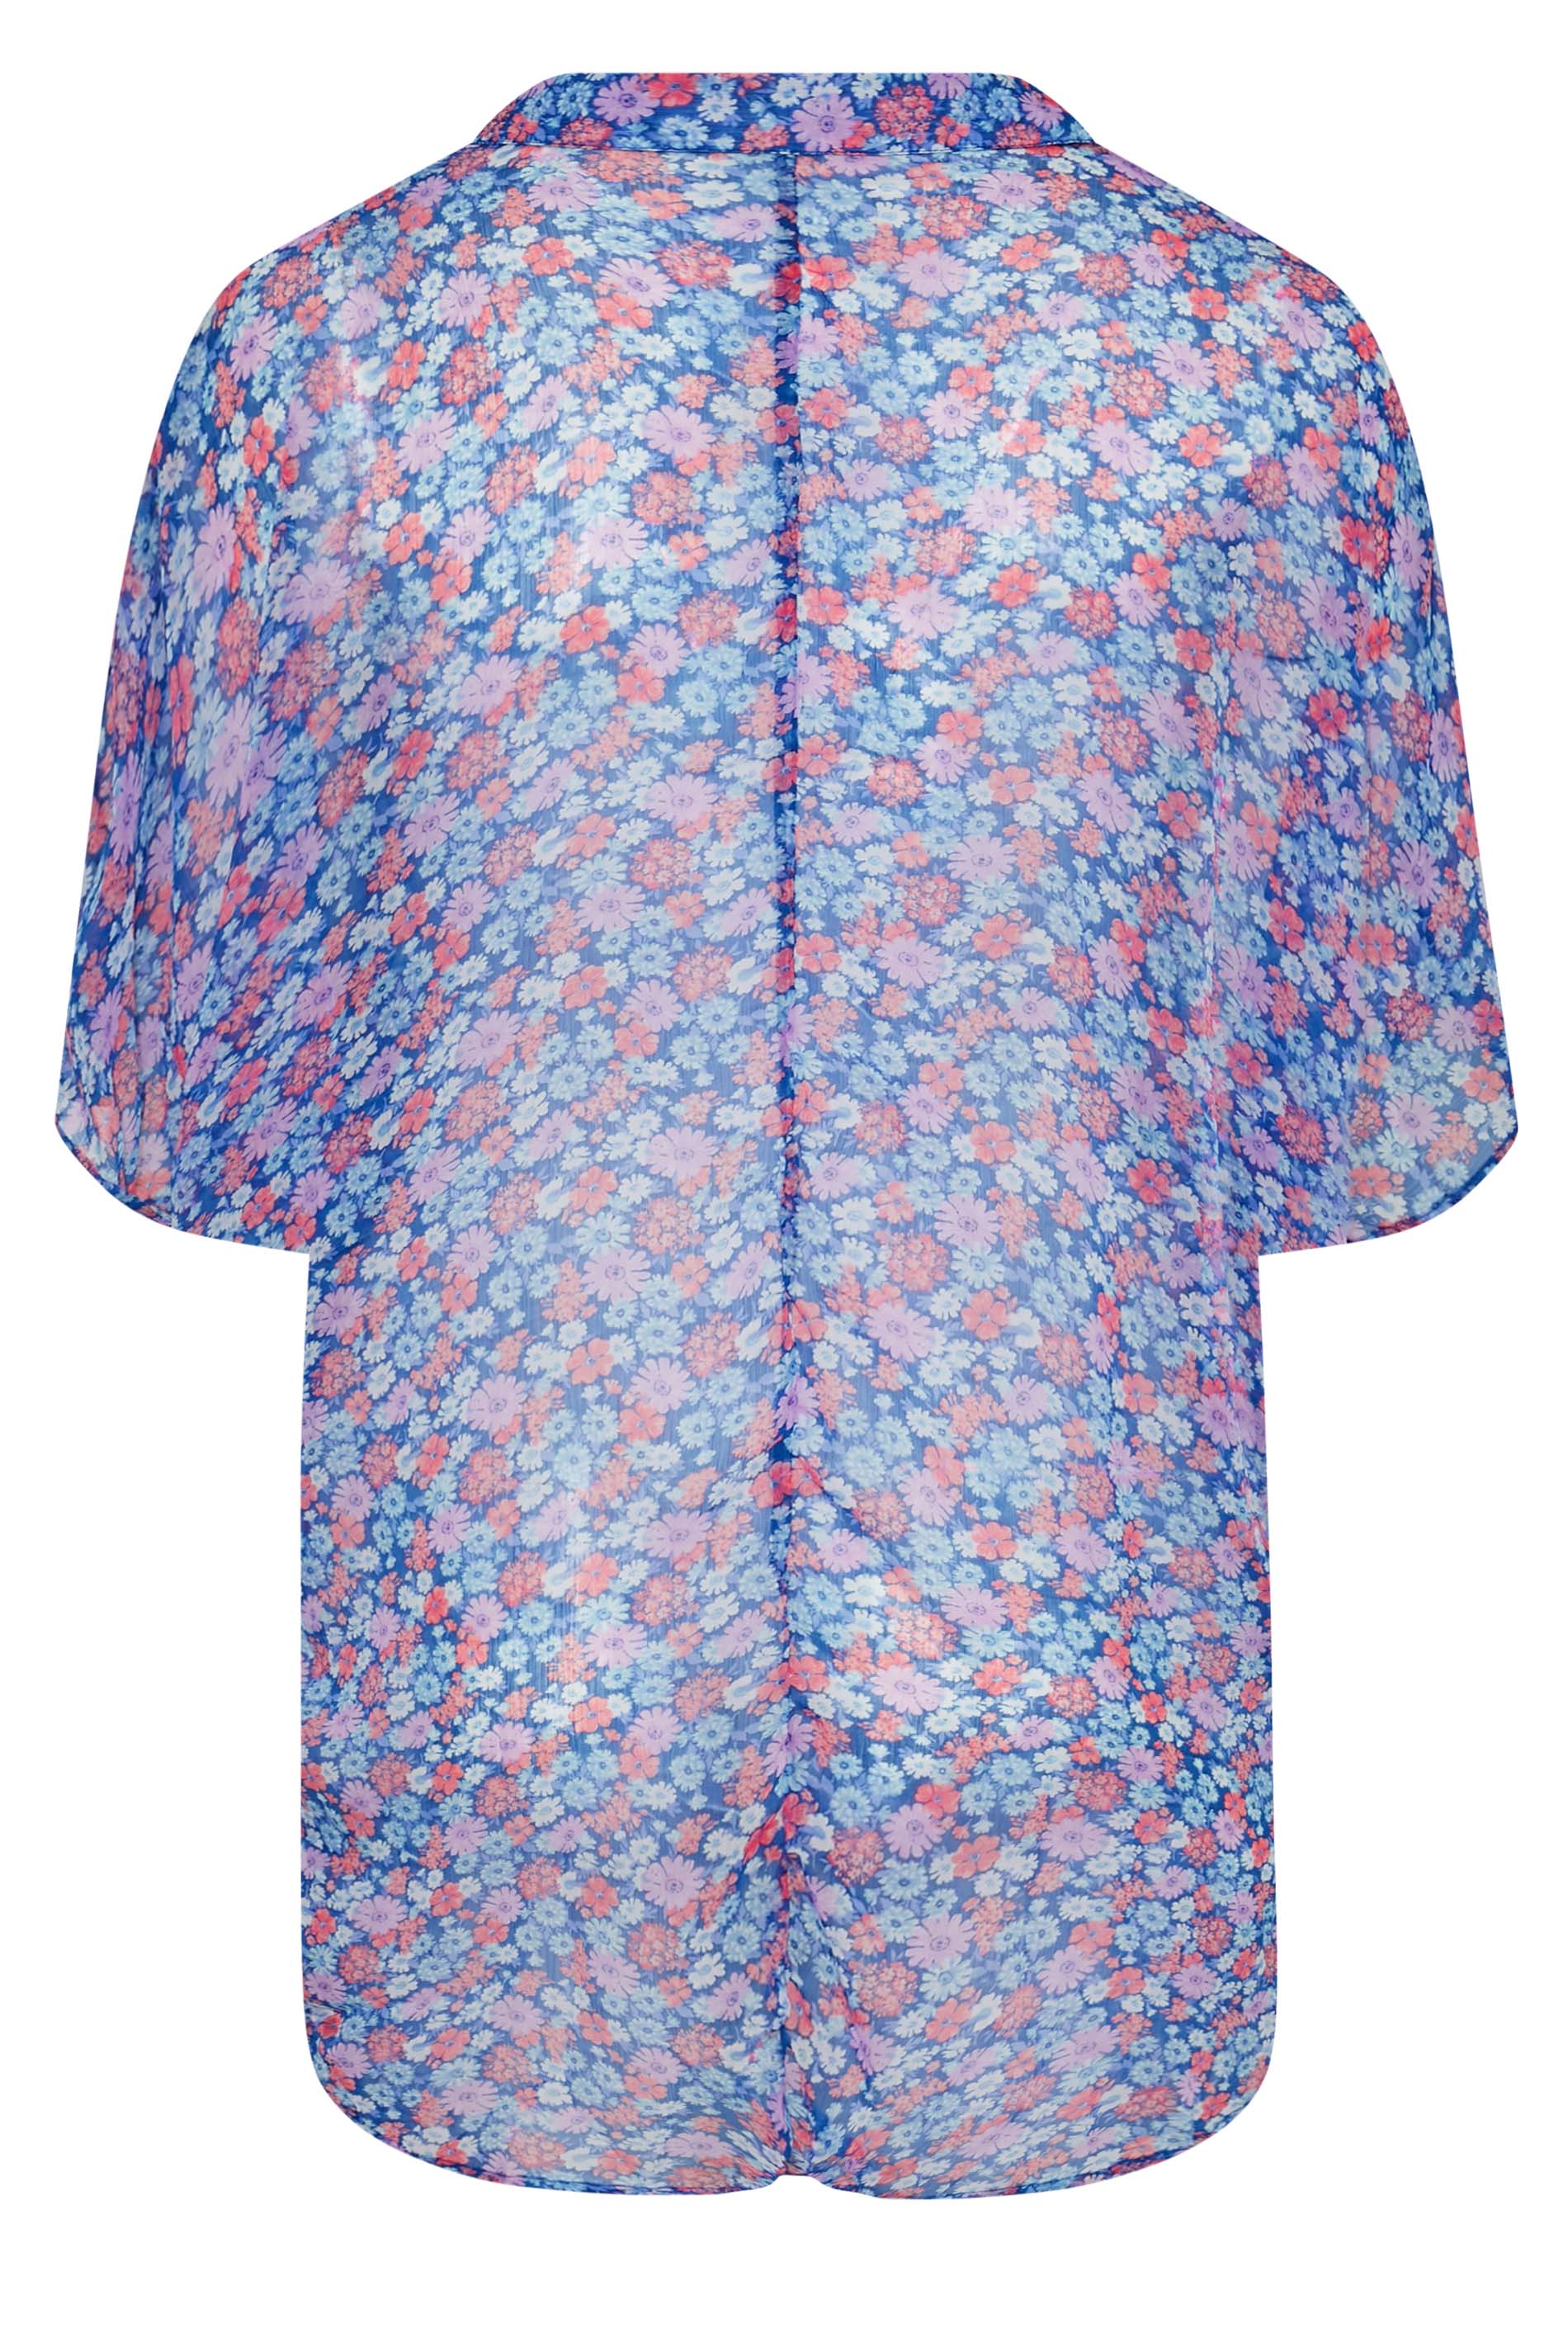 Grande taille  Tops Grande taille  Blouses & Chemisiers | Curve Blue Floral Print Batwing Shirt - VY78226